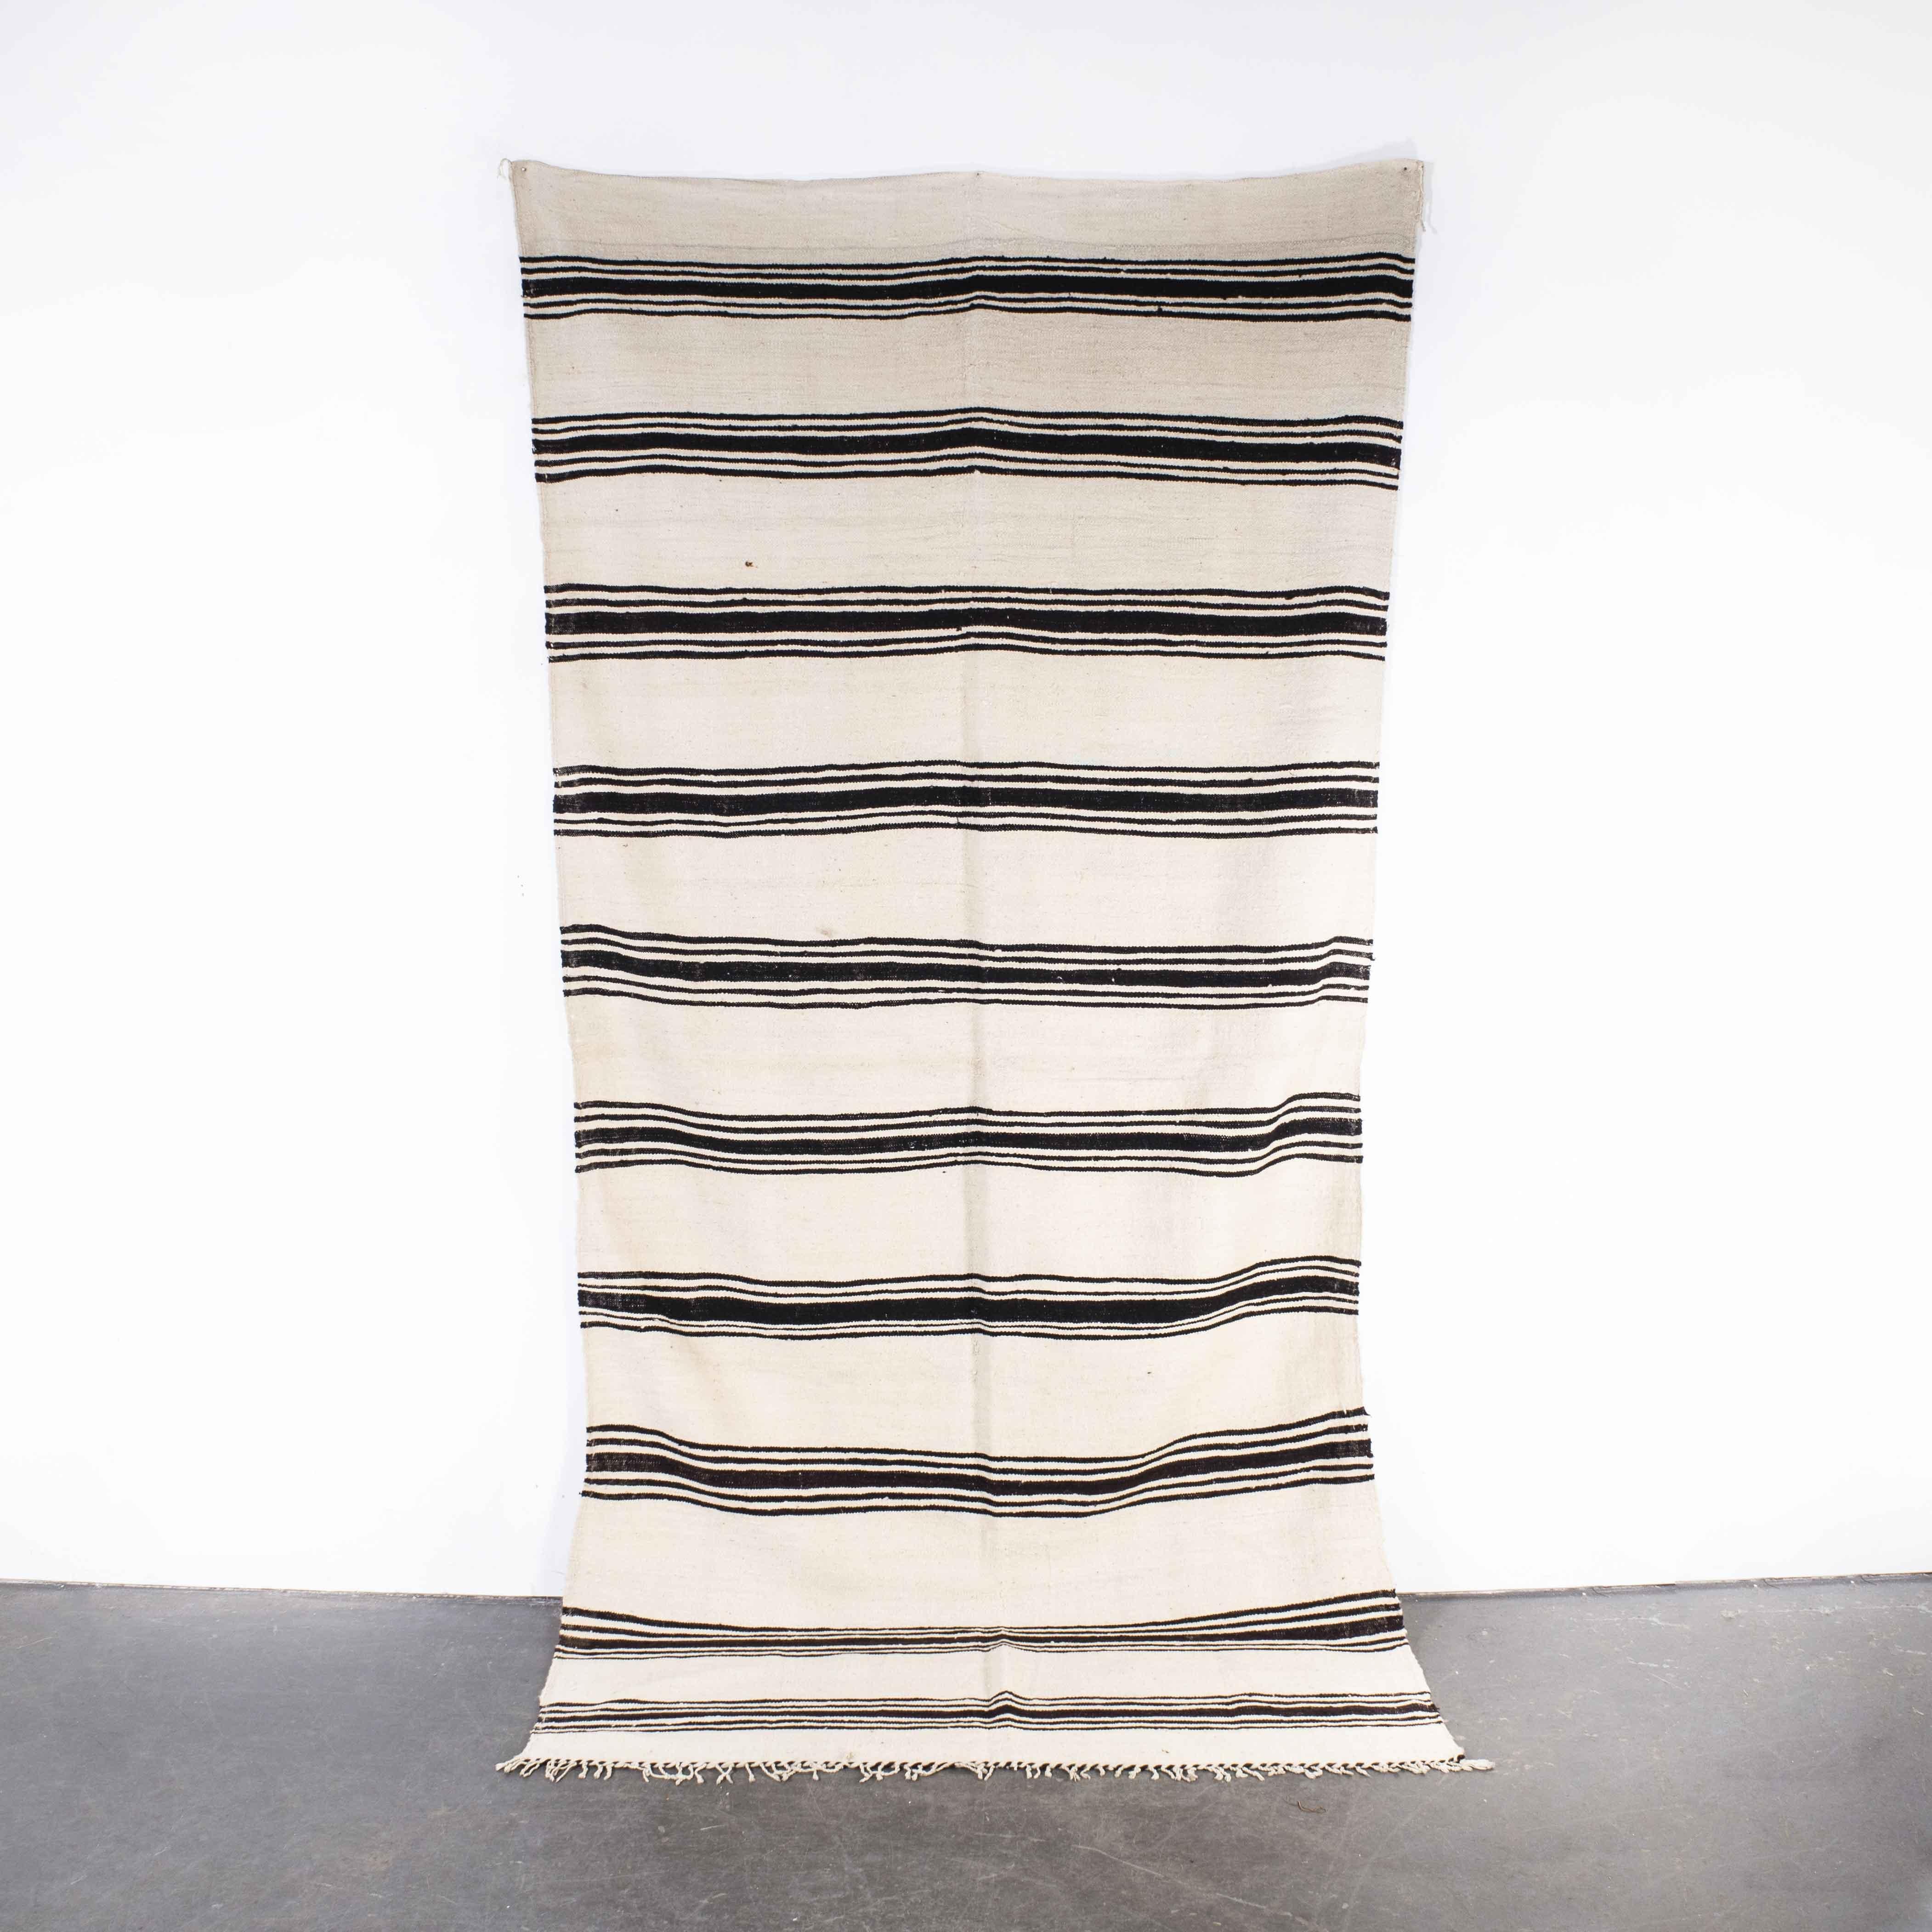 Vintage Berber Bold Monochrome Stripe Hanbel Rug
Vintage Berber Bold Monochrome Stripe Hanbel Rug. These are flat-woven rugs (Hanbel in Arabic) which are light in weight due to the lack of pile. They are often used on floors in hotter countries as